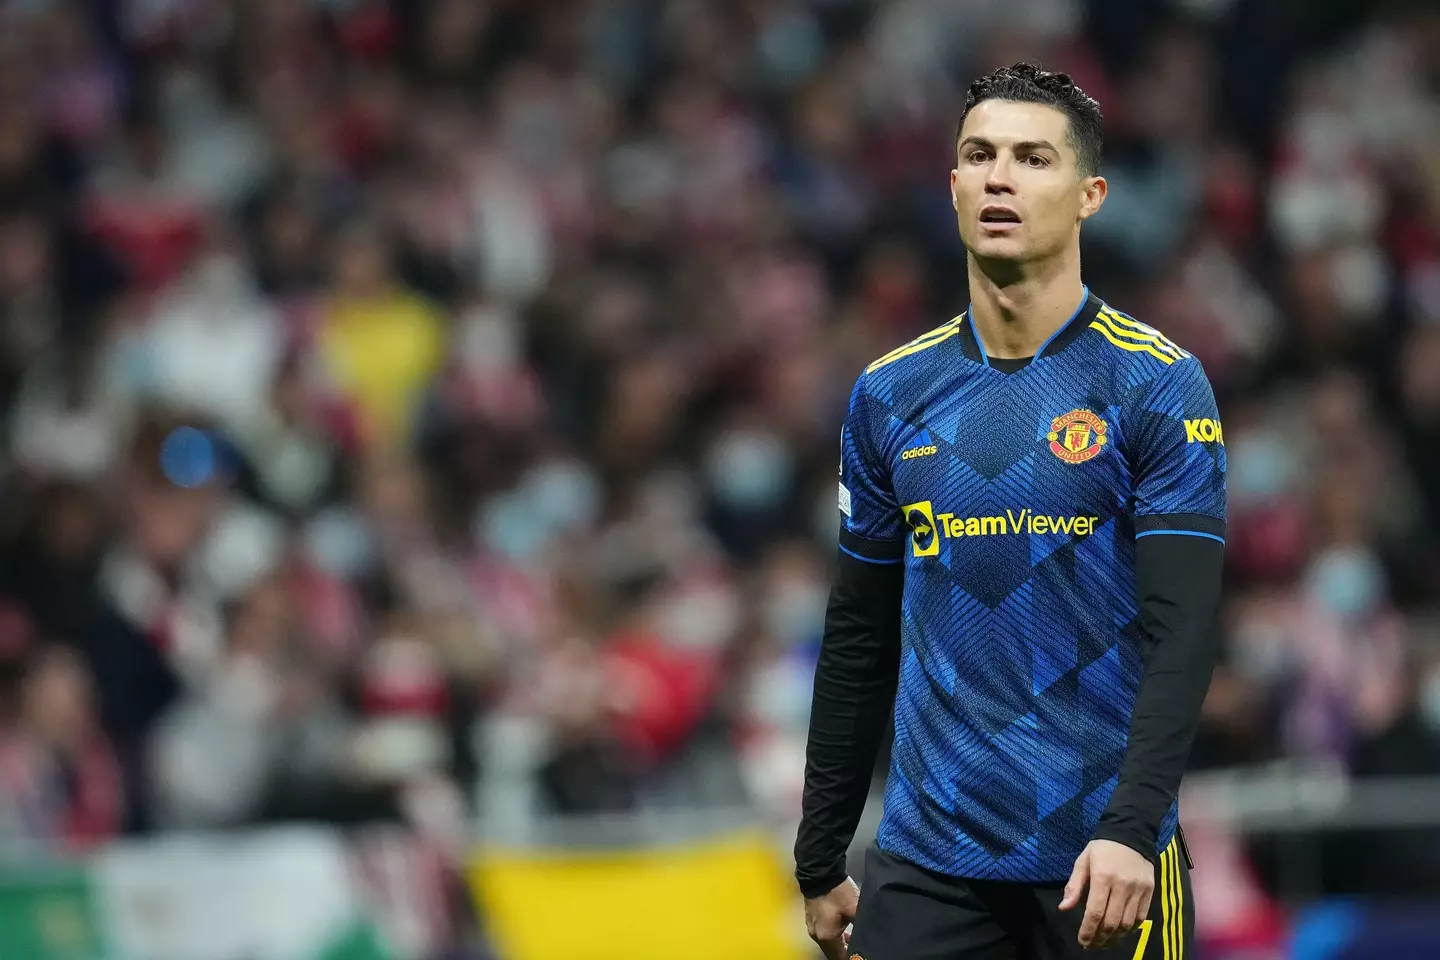 Ronaldo failed to have a shot on target against Atletico (Image: PA)